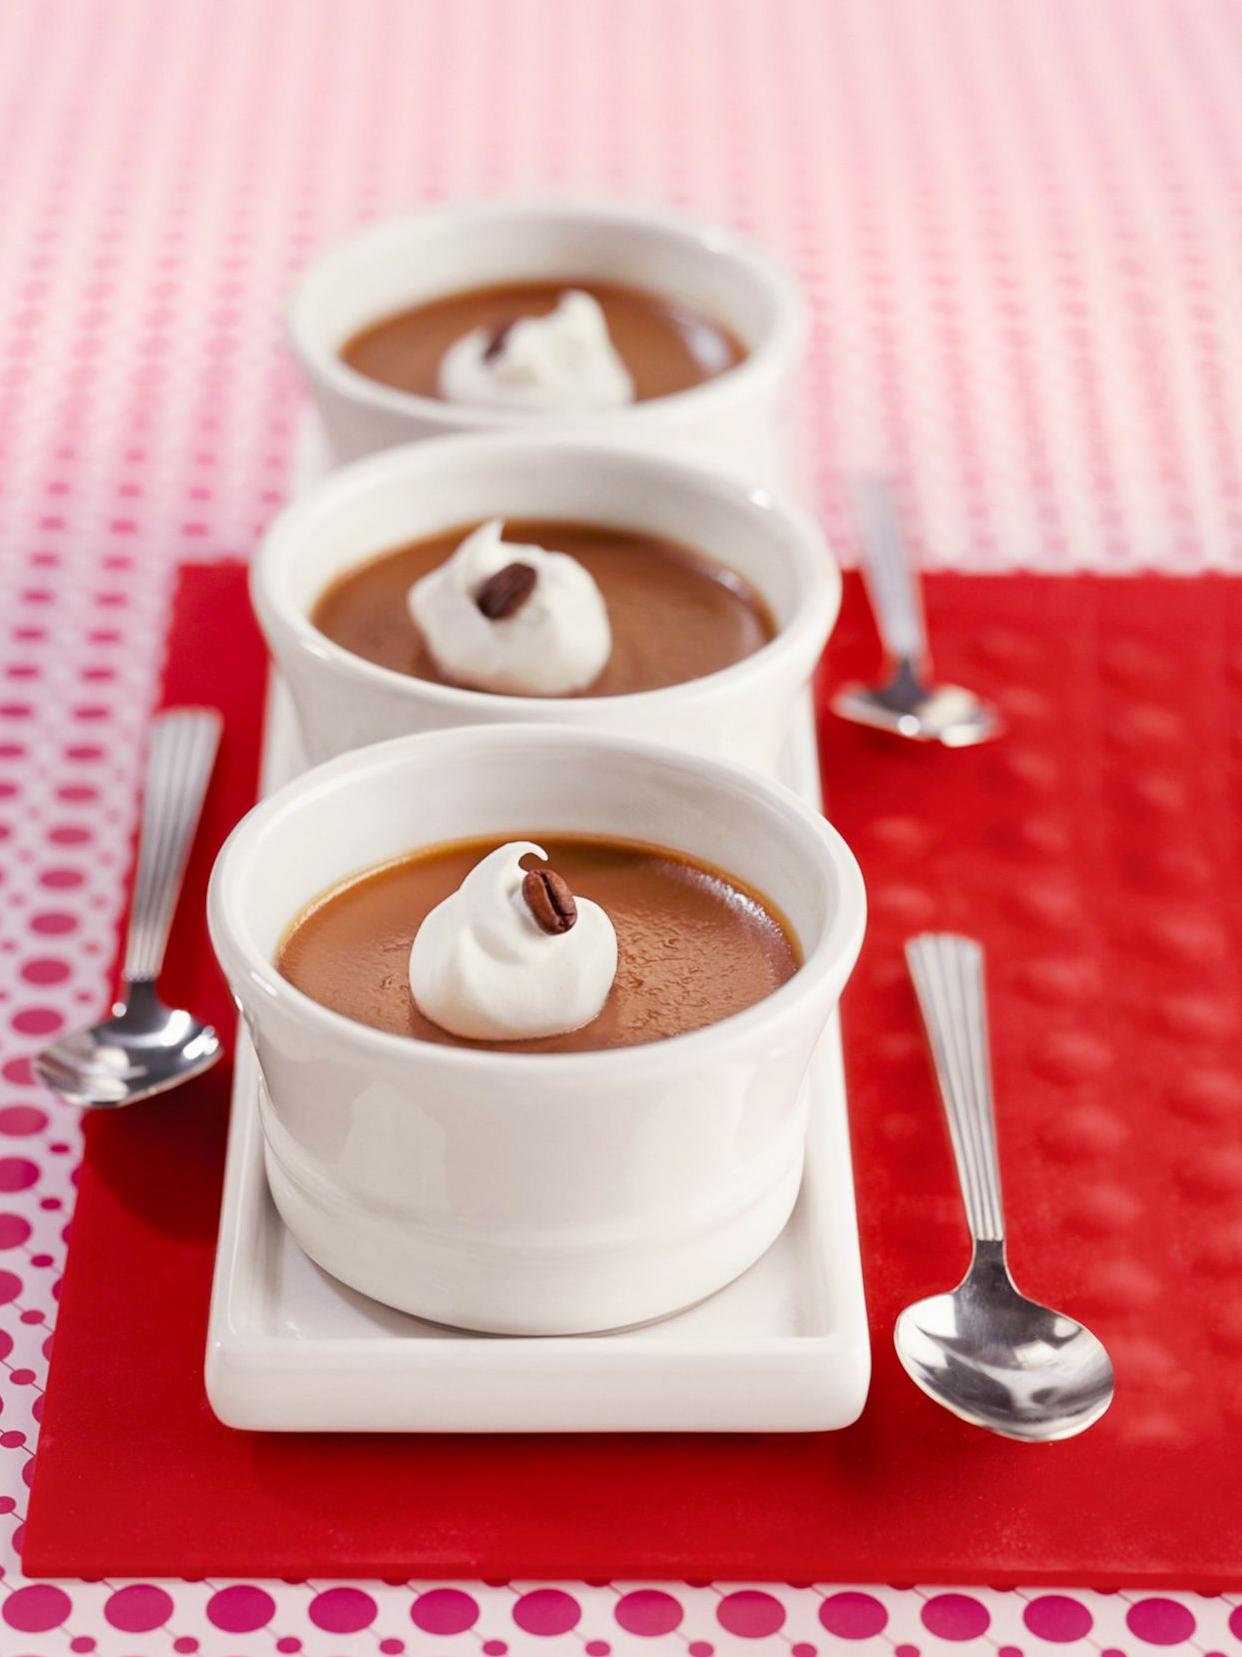  Indulge in our Mocha Custard recipe; it's sure to be a crowd-pleaser at any party or gathering!